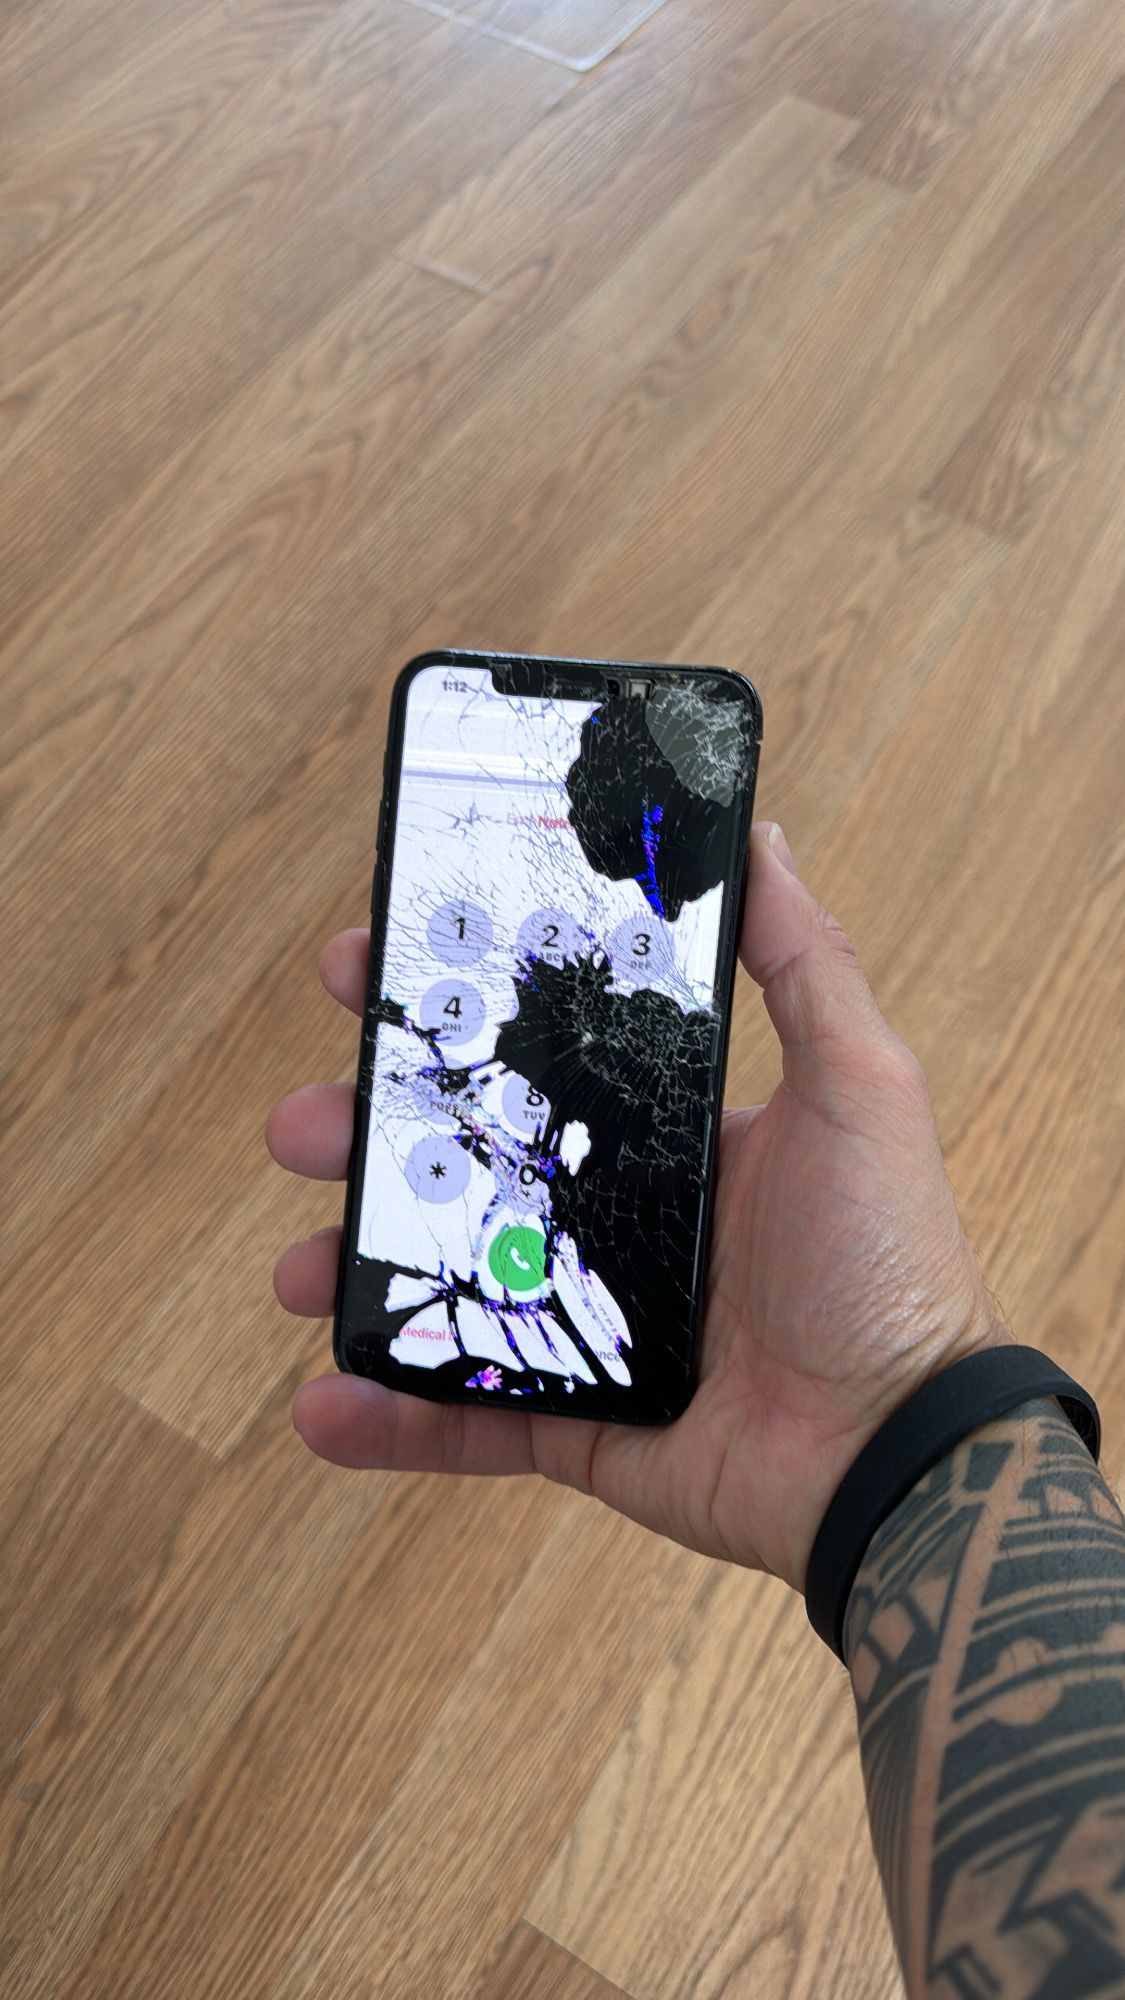 Iphone 11 Pro Max Screen Crack Replacement $65